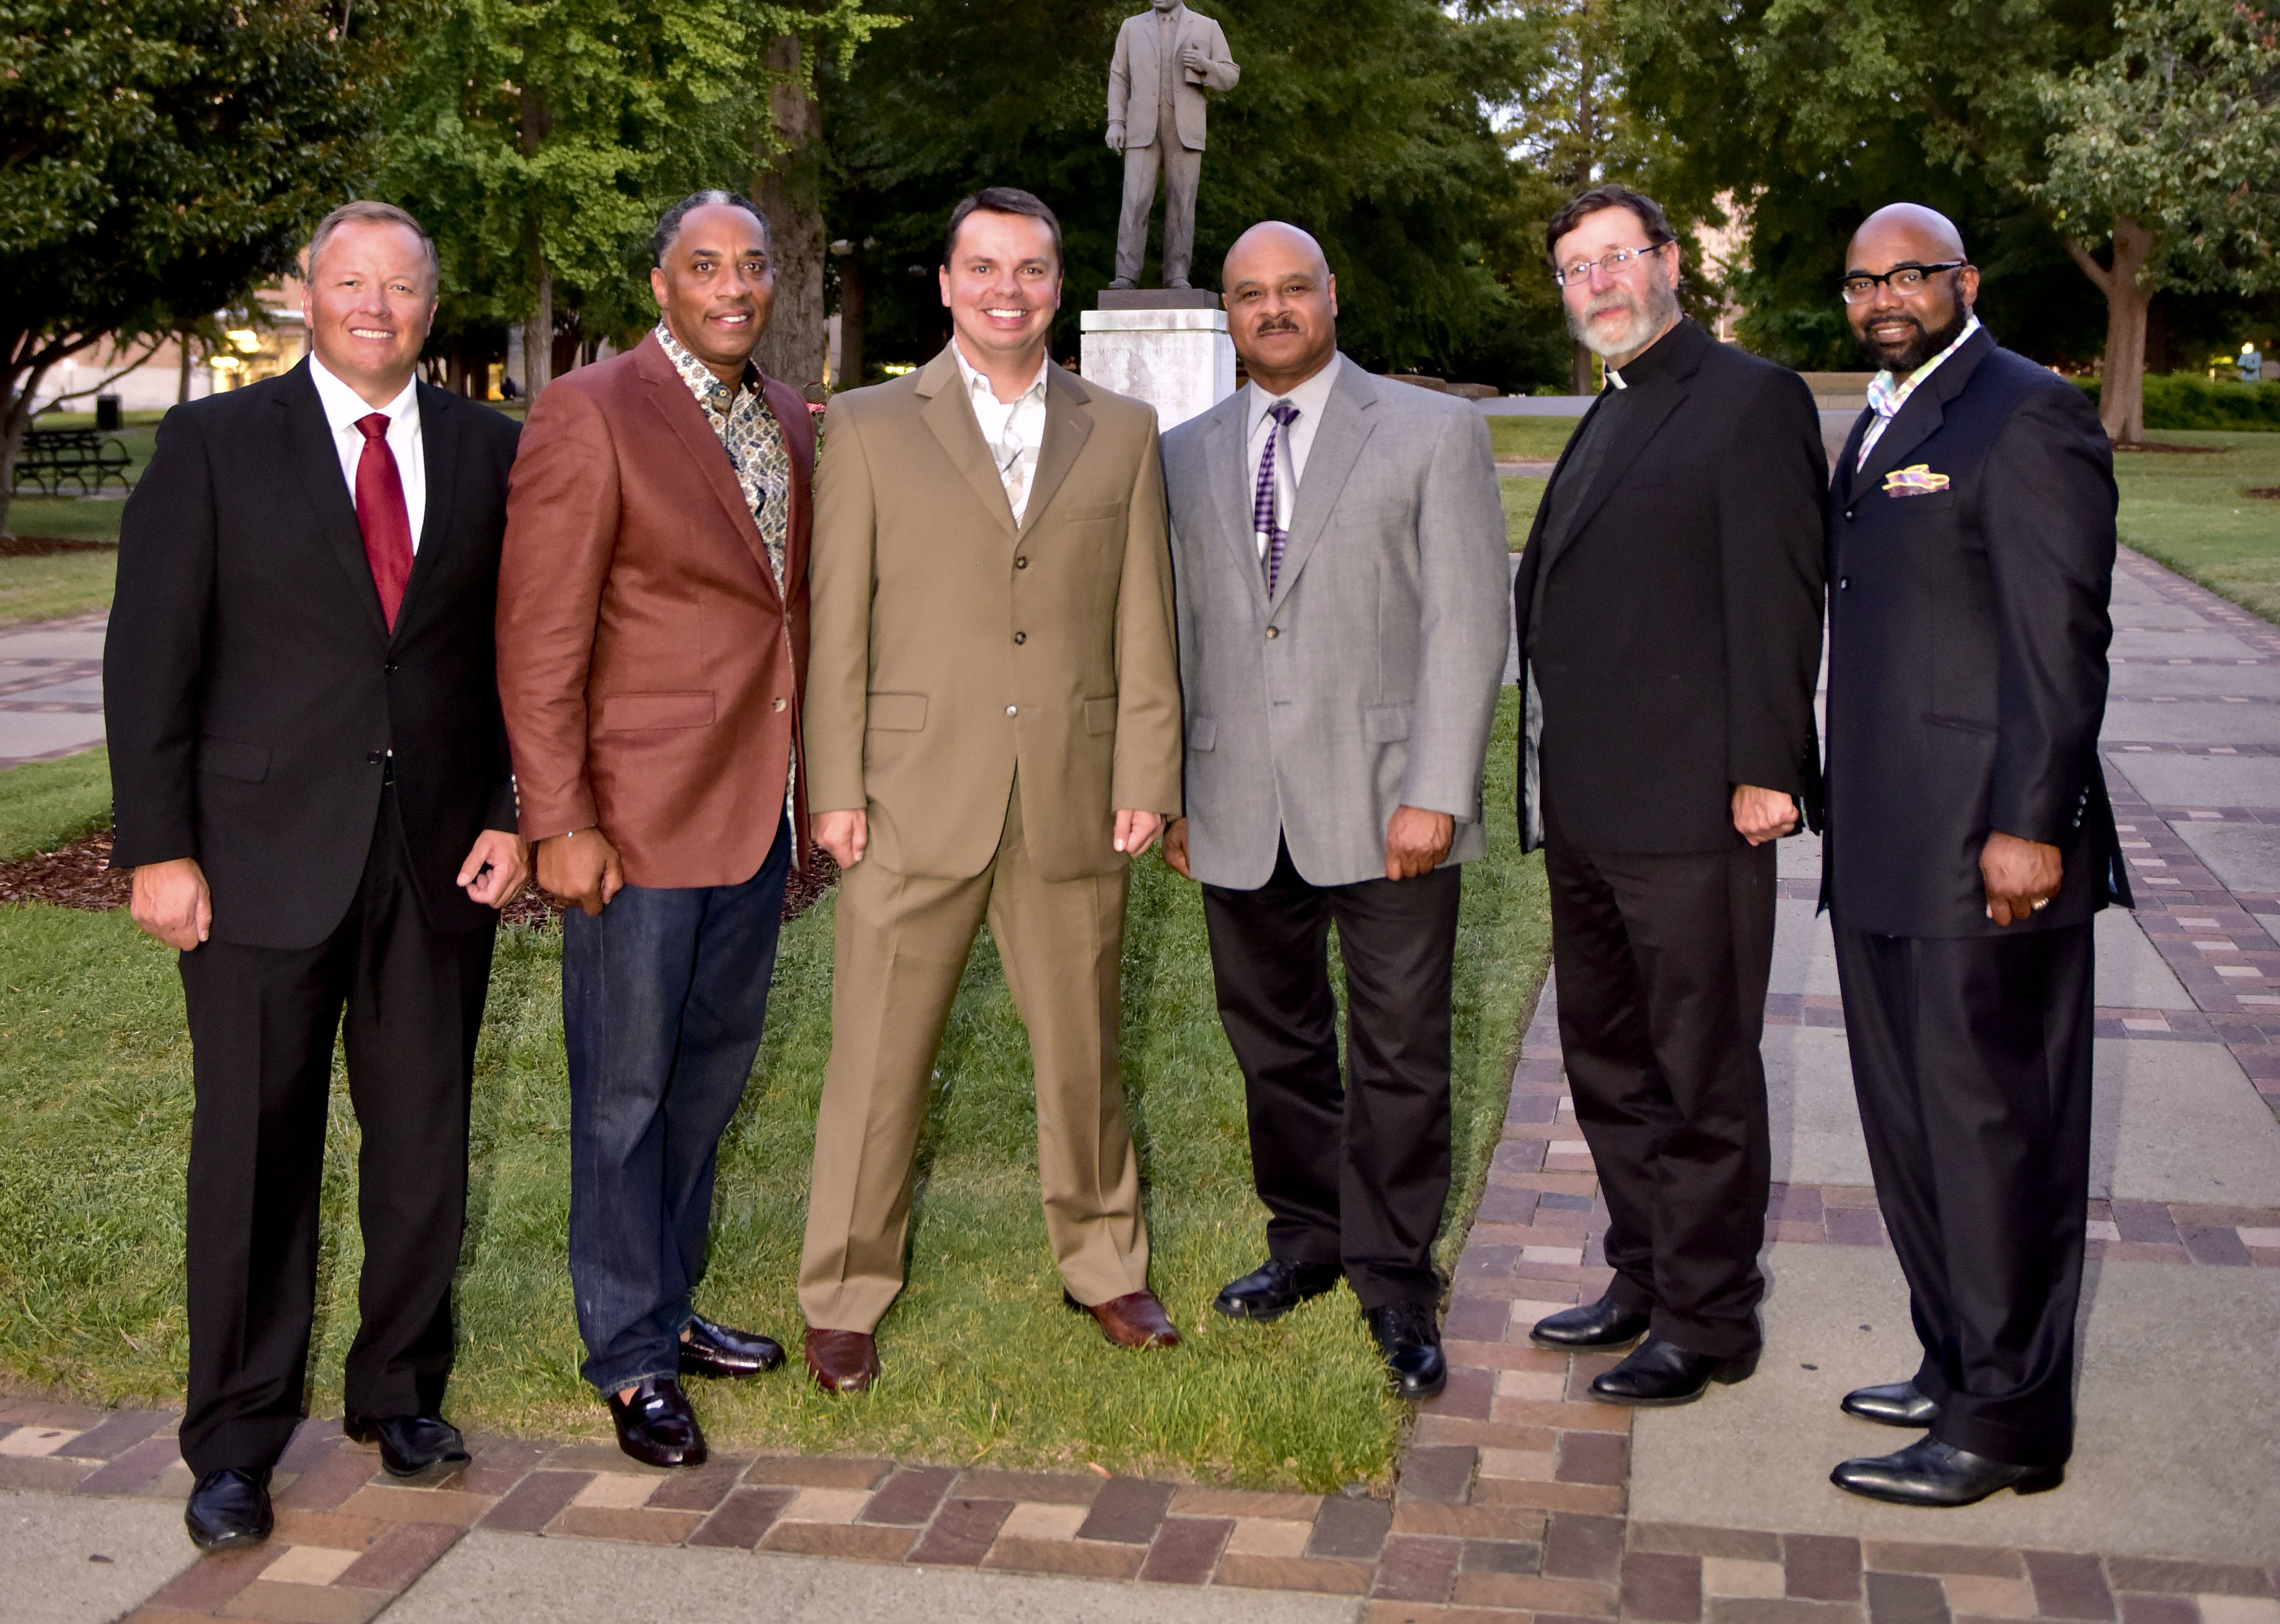 From left: Larry Ragland, Mike McClure, Sr., Jody Trautwein, Bishop Lowe, Jr., Fr. Mitchell Pacwa S.J. and Doug Taylor, members of the Gatekeepers Association of Alabama, gather in Kelly Ingram Park. (Frank Couch/The Birmingham Times)